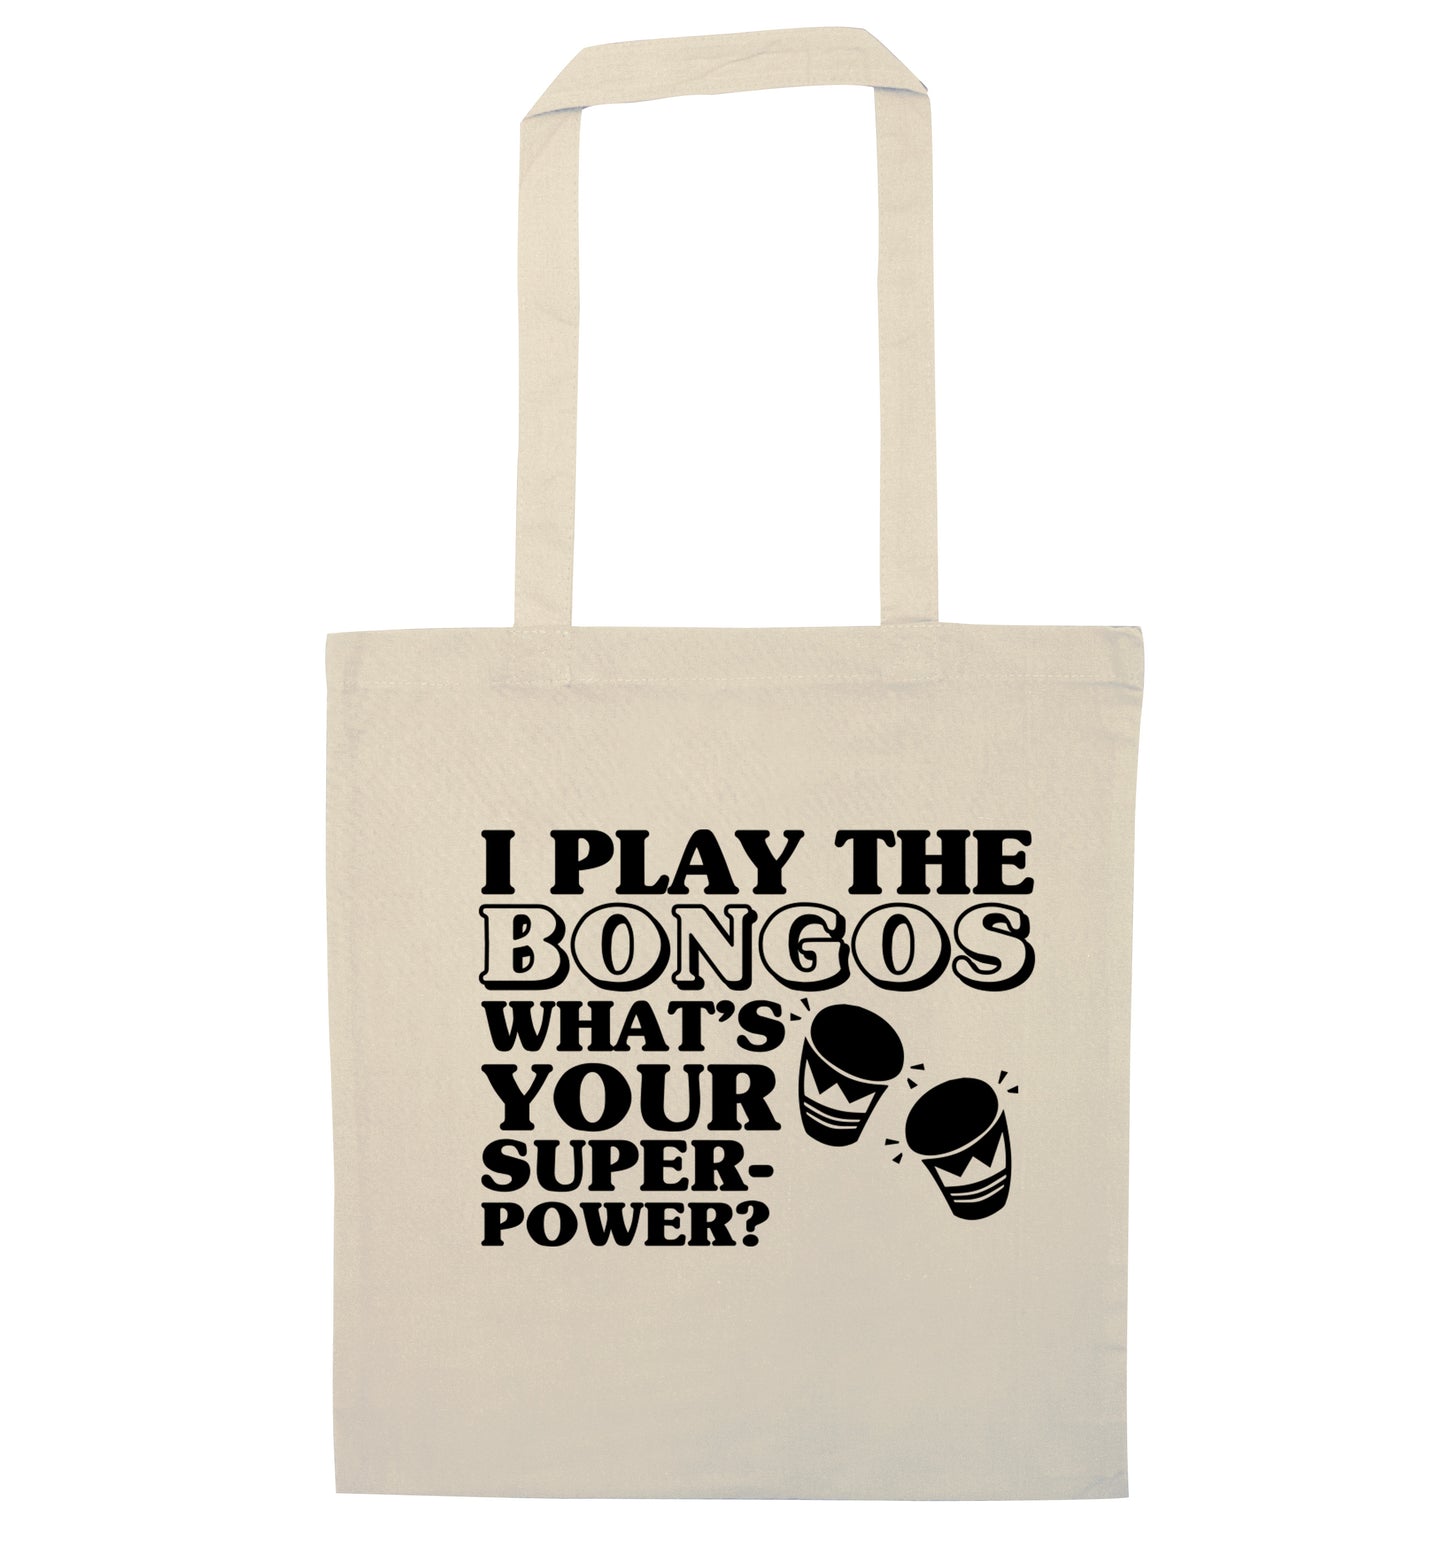 I play the bongos what's your superpower? natural tote bag